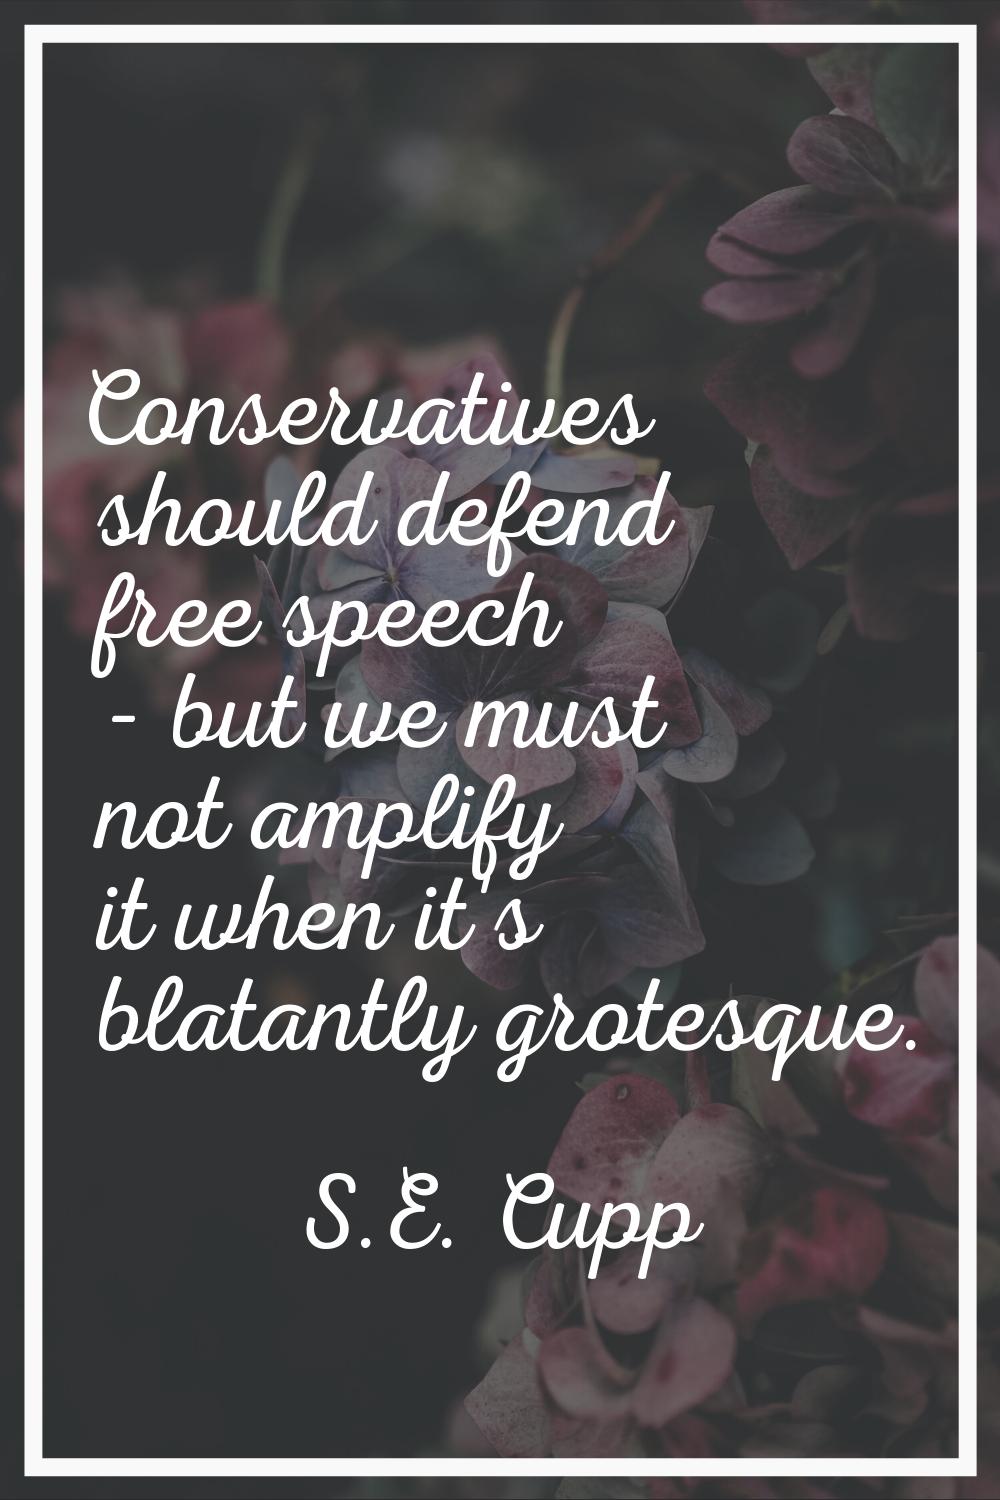 Conservatives should defend free speech - but we must not amplify it when it's blatantly grotesque.